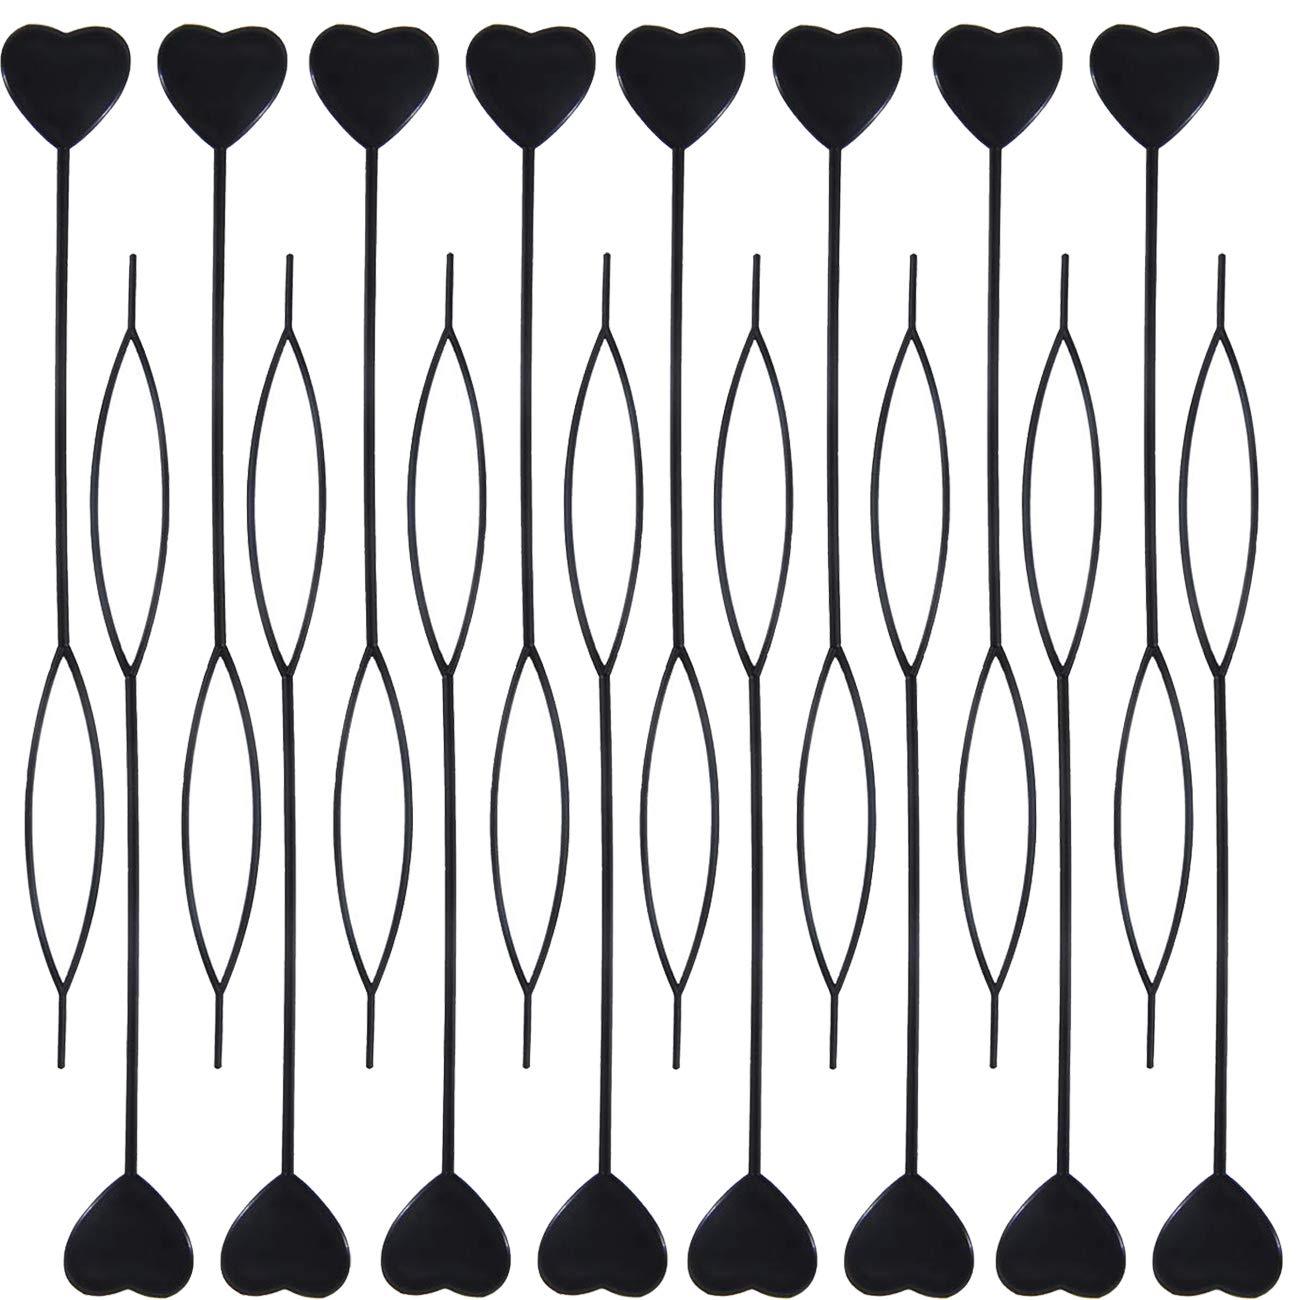 TIHOOD 16PCS Quick Beader for Loading Beads/Automatic Hair Beader and  Styling Kit/Plastic Magic Topsy Tail Hair Braid Ponytail Styling Maker